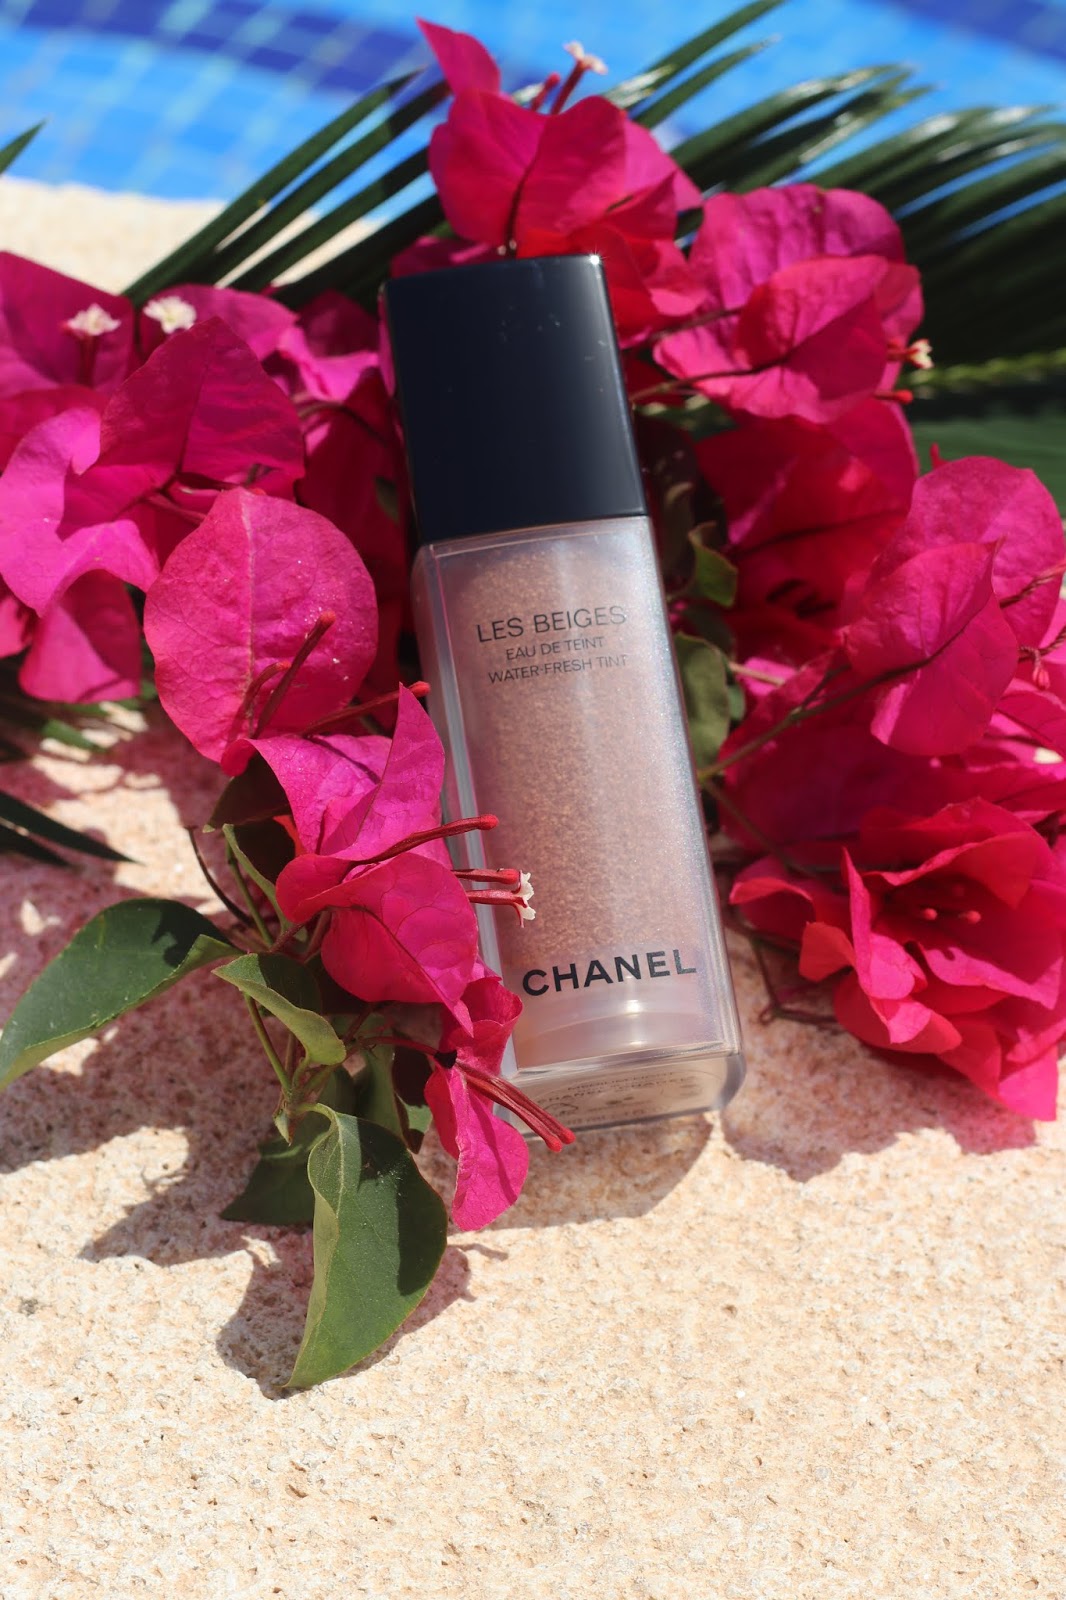 Chanel Les Beiges Water Fresh Tint Review